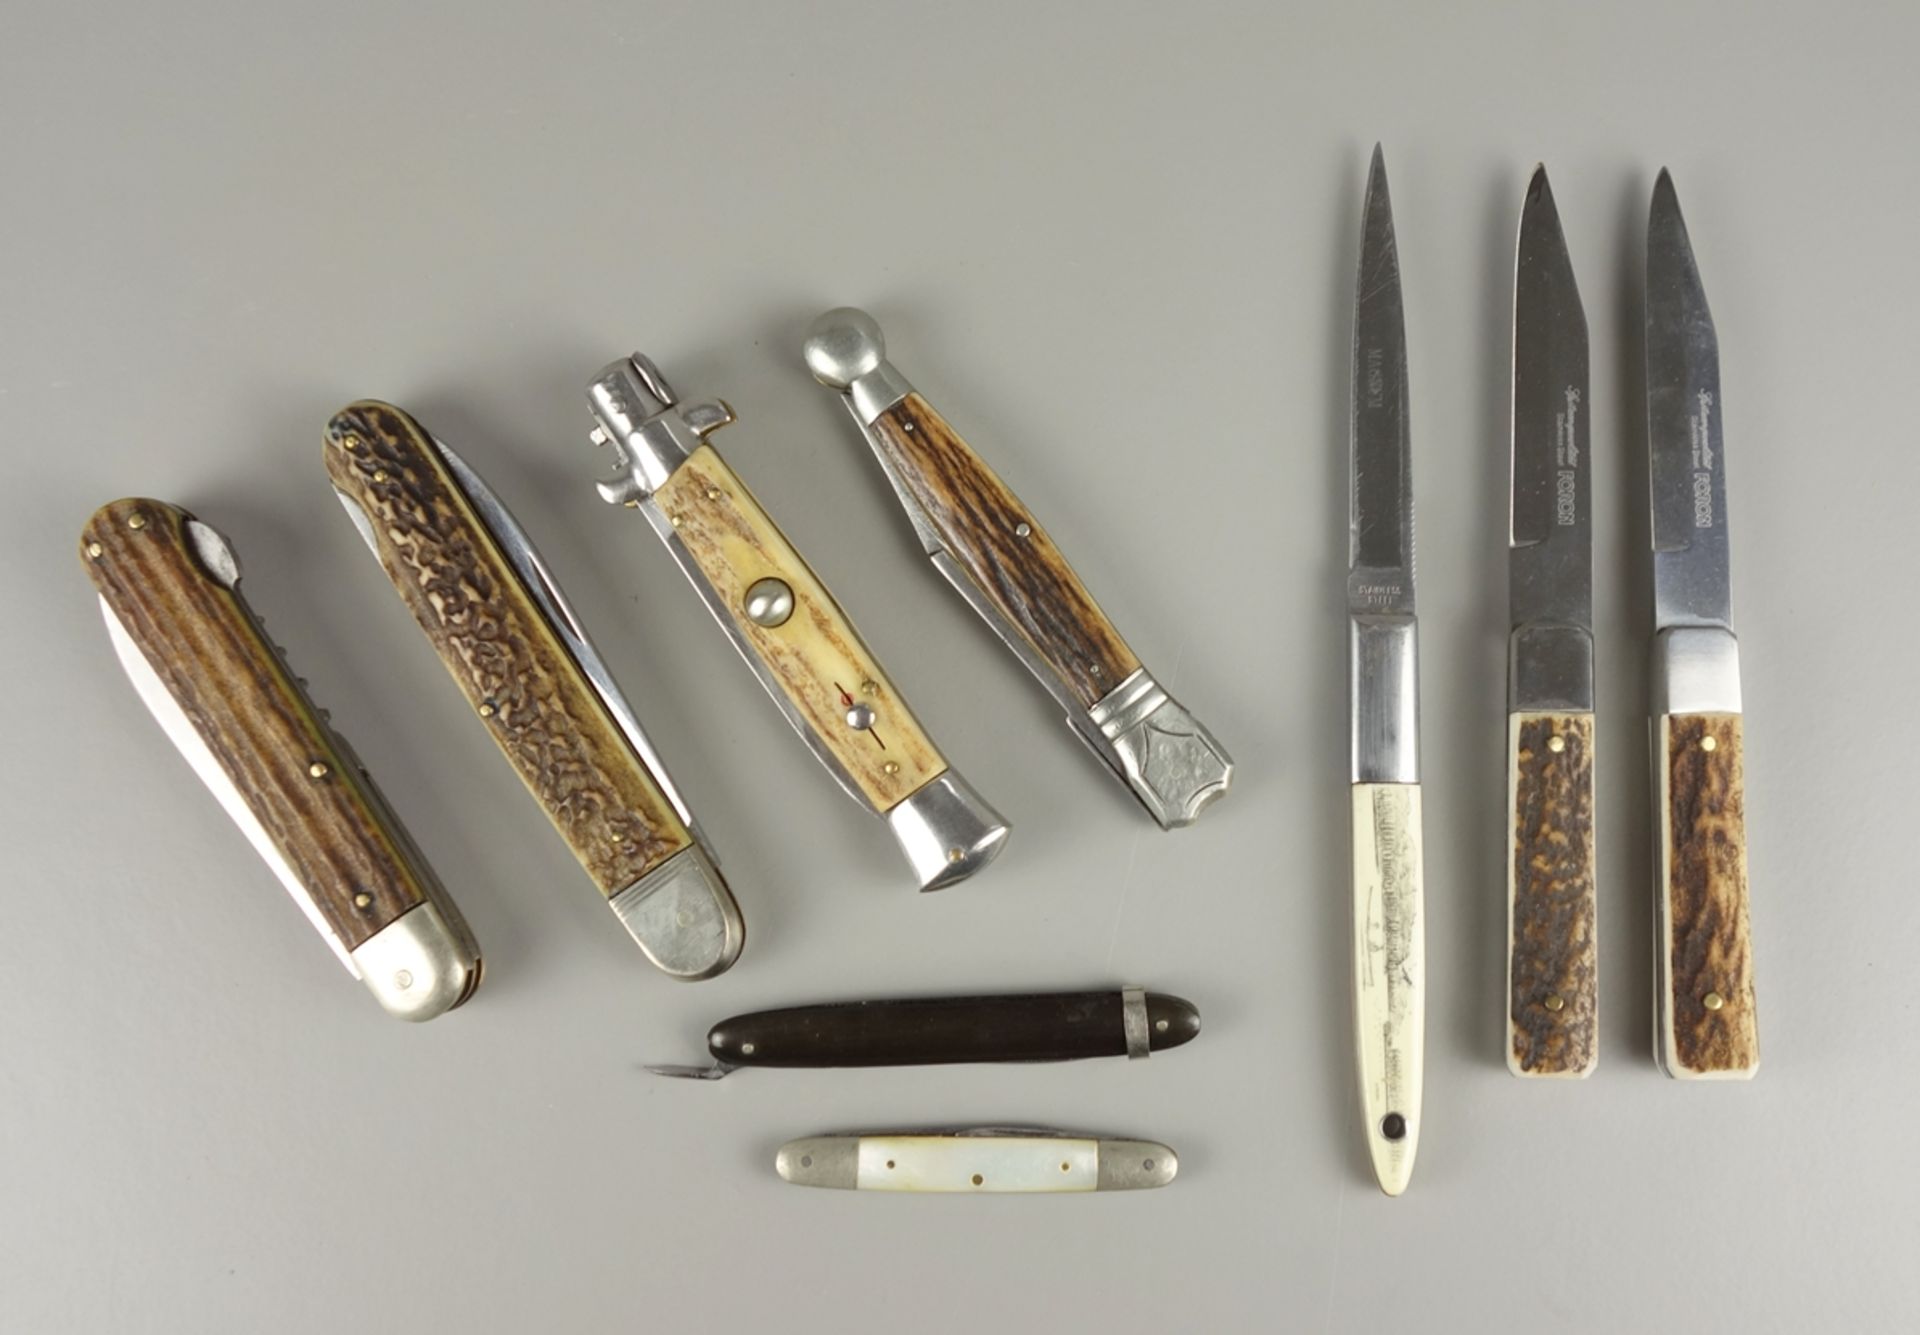 6 pocket knives and 3 knives, mostly with antler handles, mid and 2nd half 20th cent